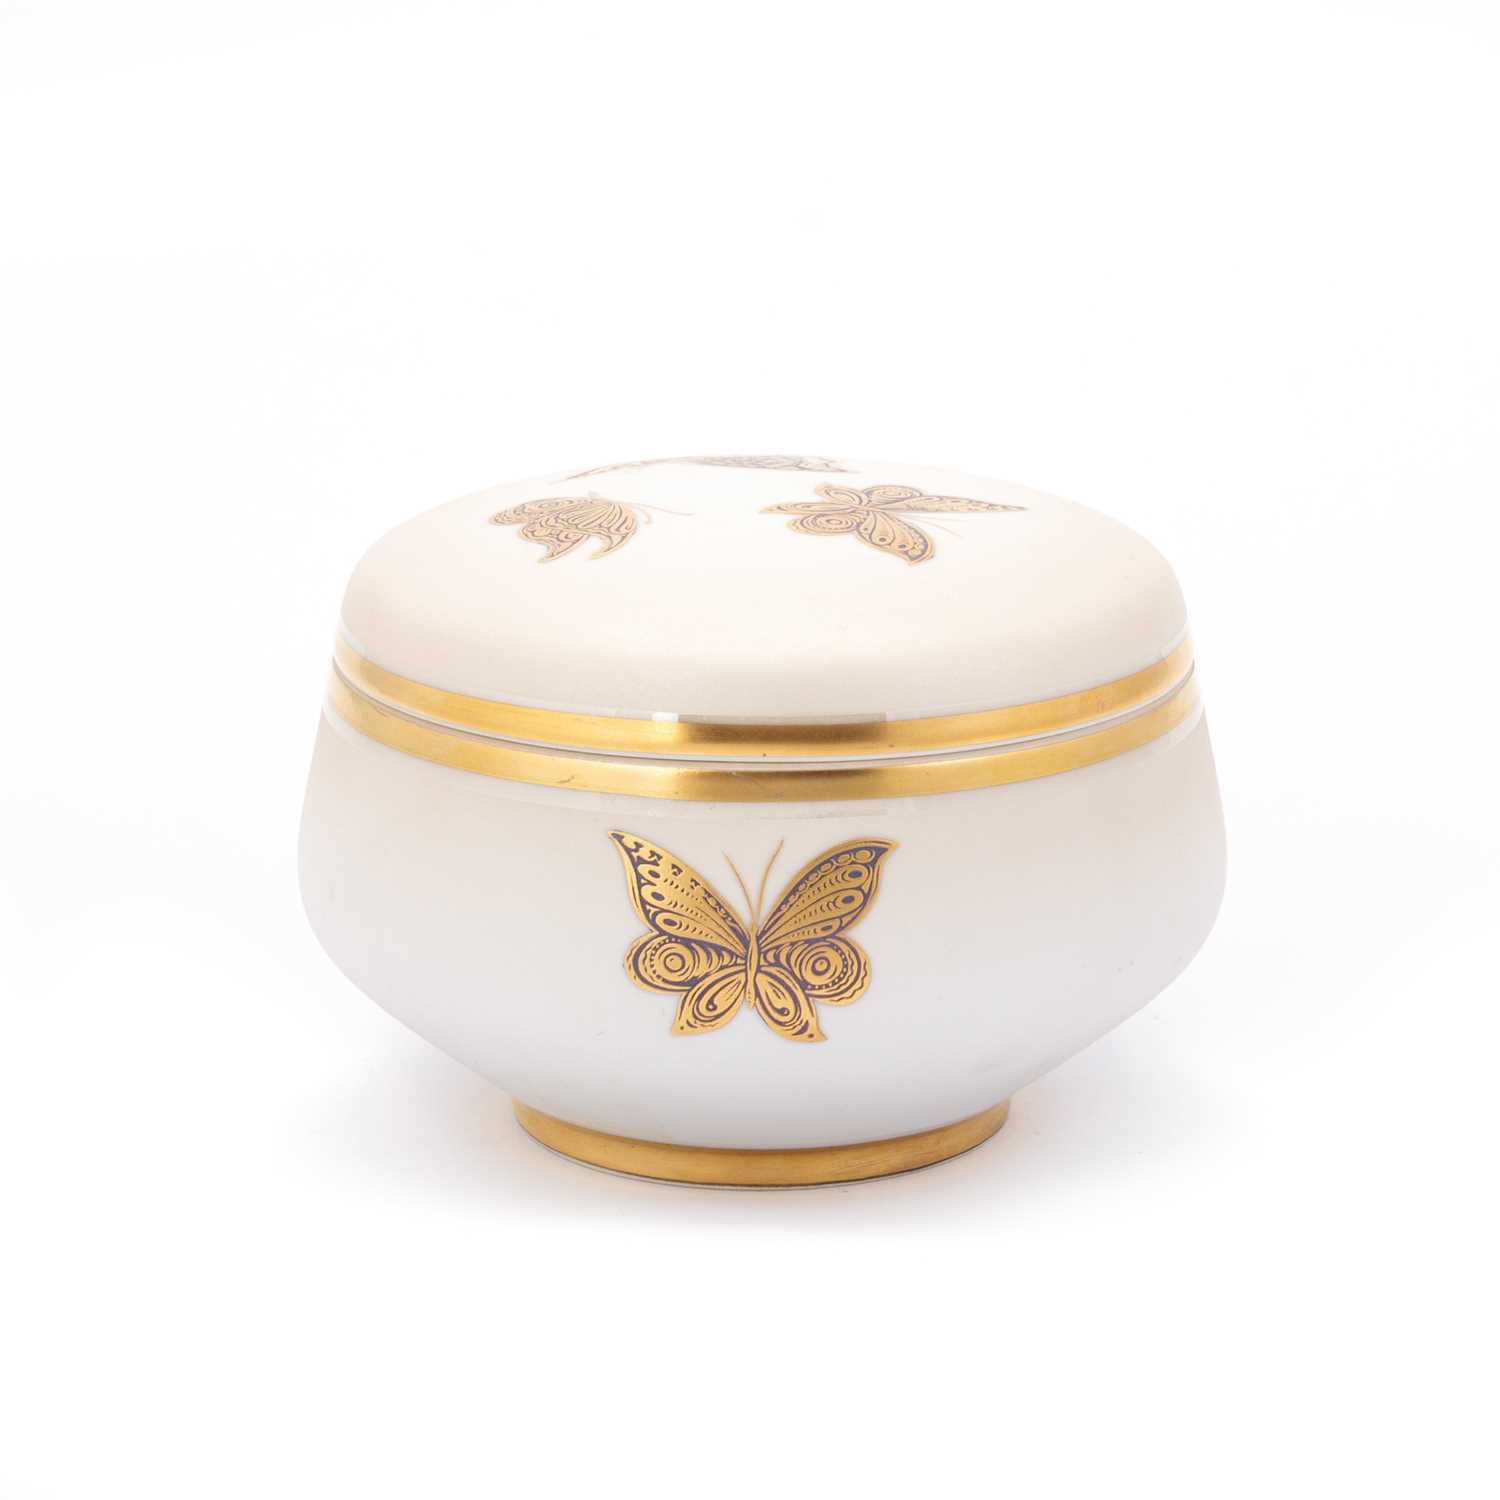 A MID-CENTURY ITALIAN PORCELAIN JEWELLERY BOX BY LONGO, LATE 1960S - Image 2 of 2